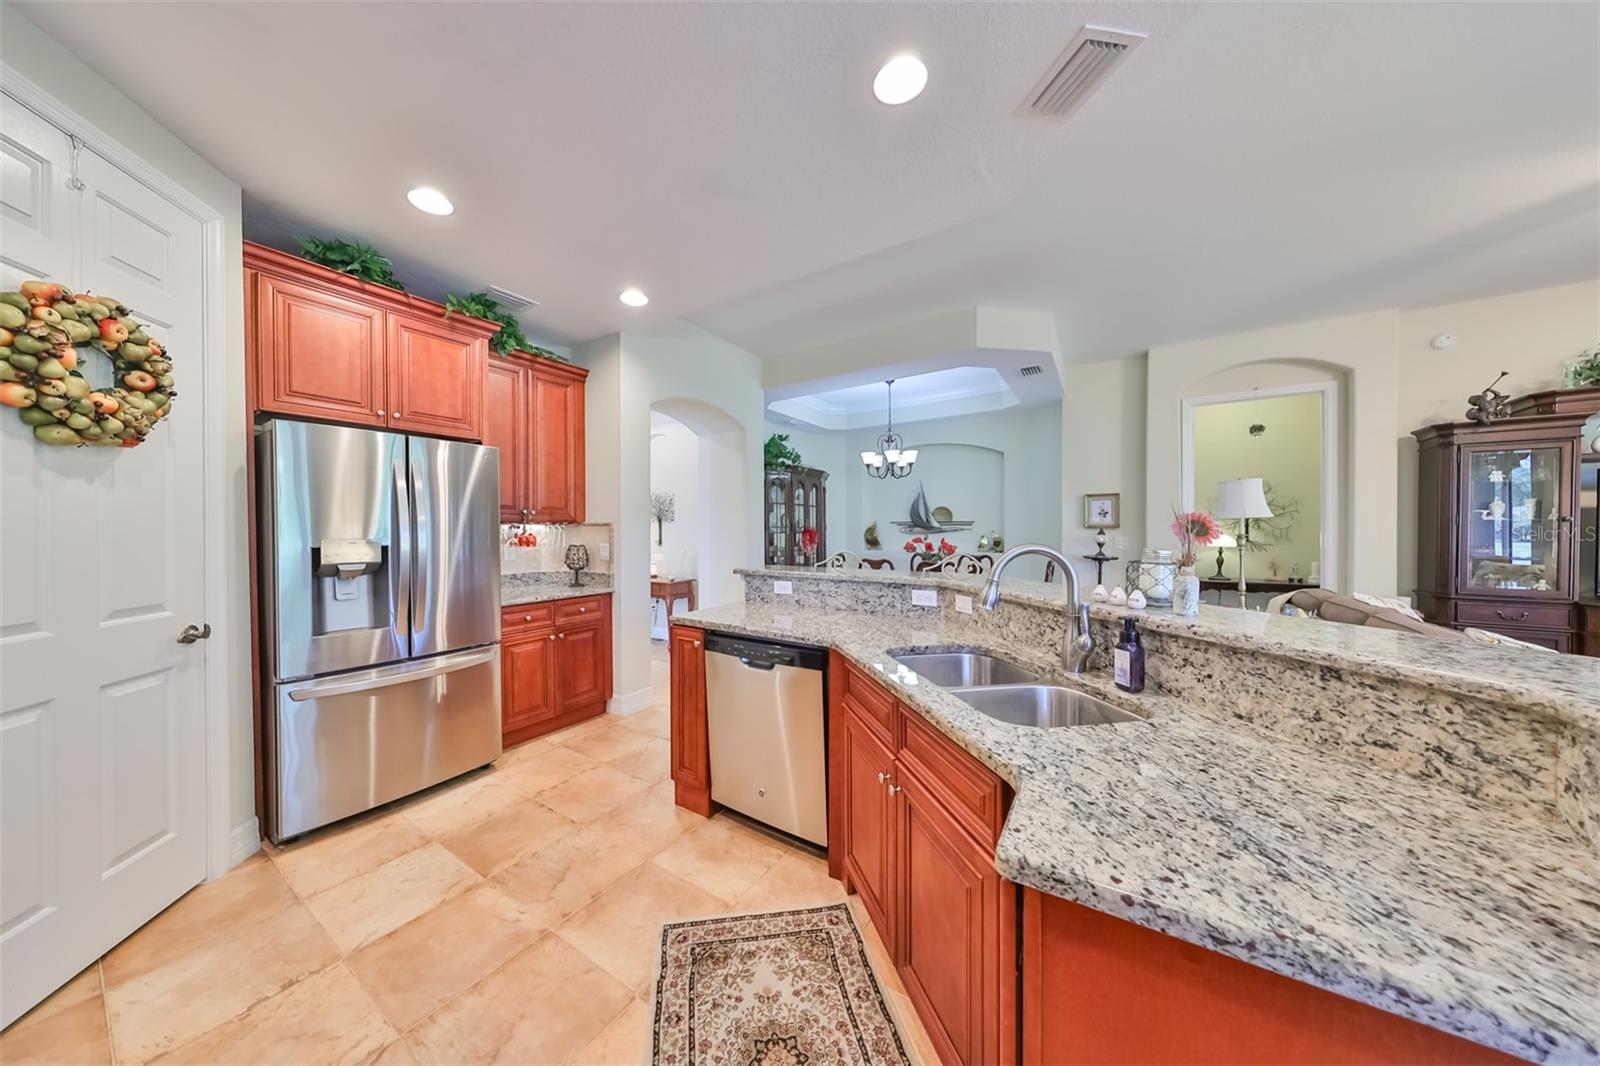 Kitchen has granite counters, under cabinet lighting, newer stainless steel appliances and a walk-in pantry.